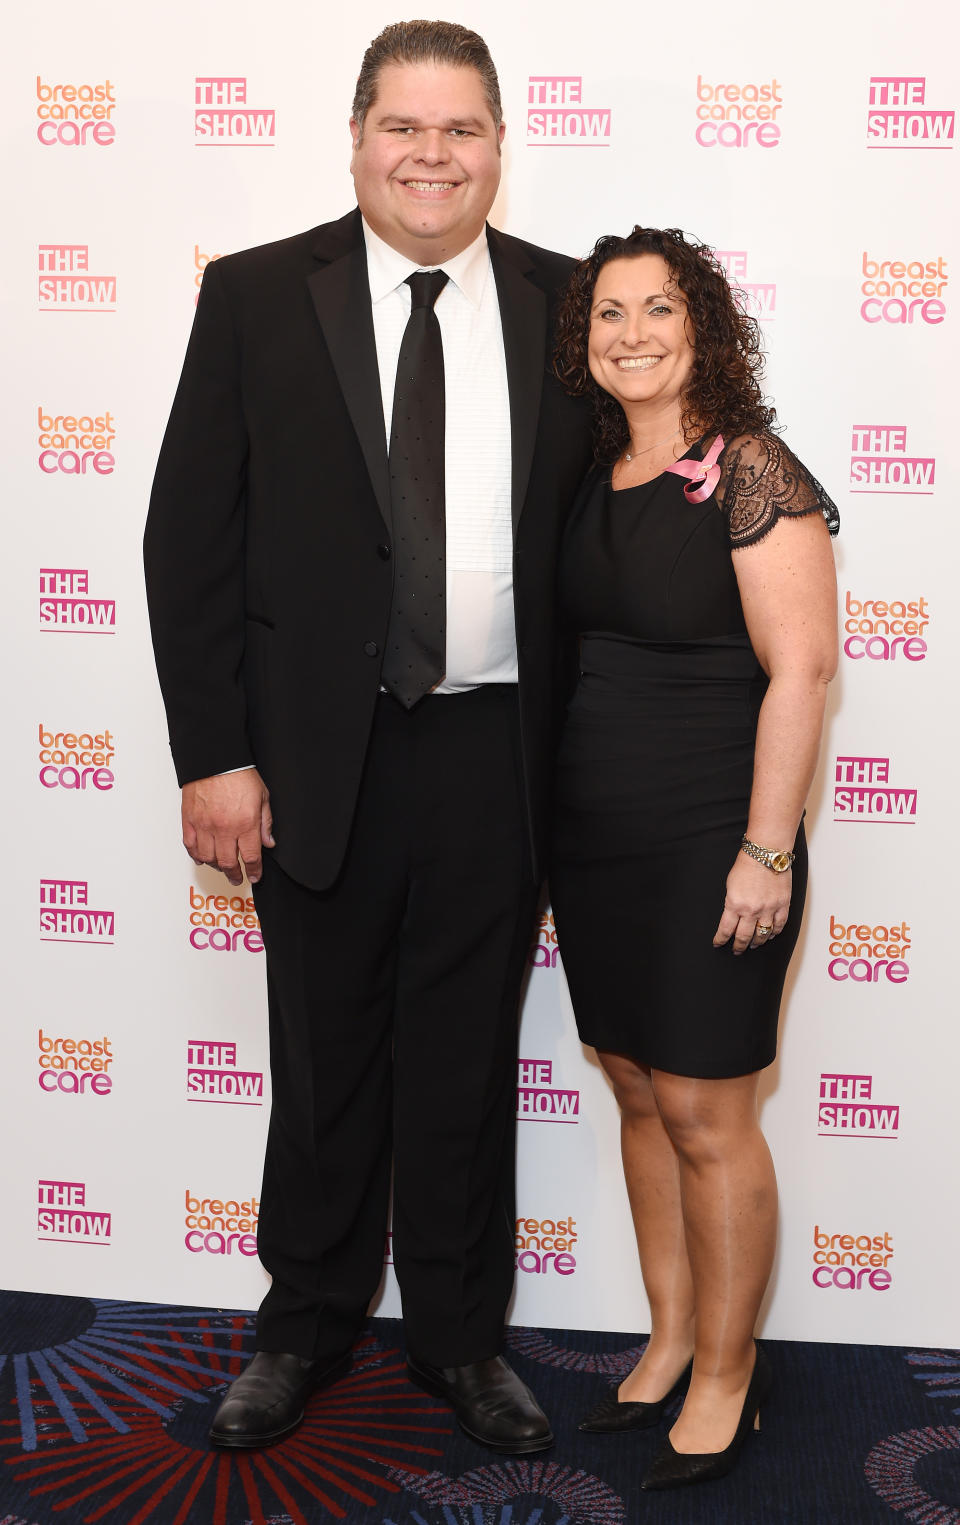 Jonathan and Nikki Tapper from GoggleBox attend Breast Cancer Care's London fashion show at Grosvenor House Hotel to launch Breast Cancer Awareness Month, on October 7, 2015 in London, England.  (Photo by Tabatha Fireman/Getty Images for Breast Cancer Care)